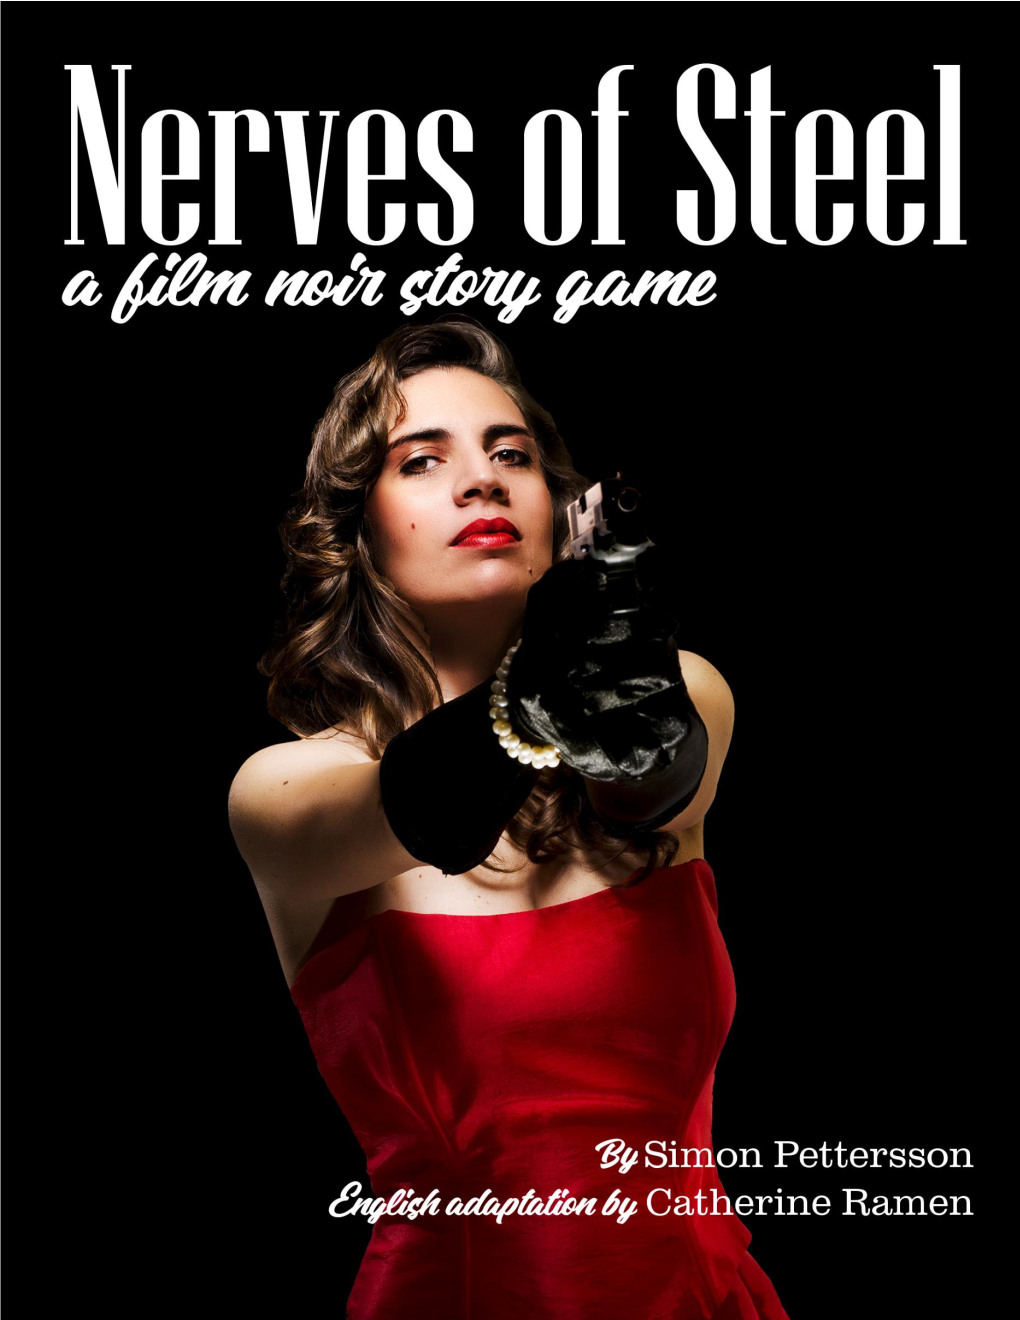 Nerves of Steel the Condensed Edition.Pdf